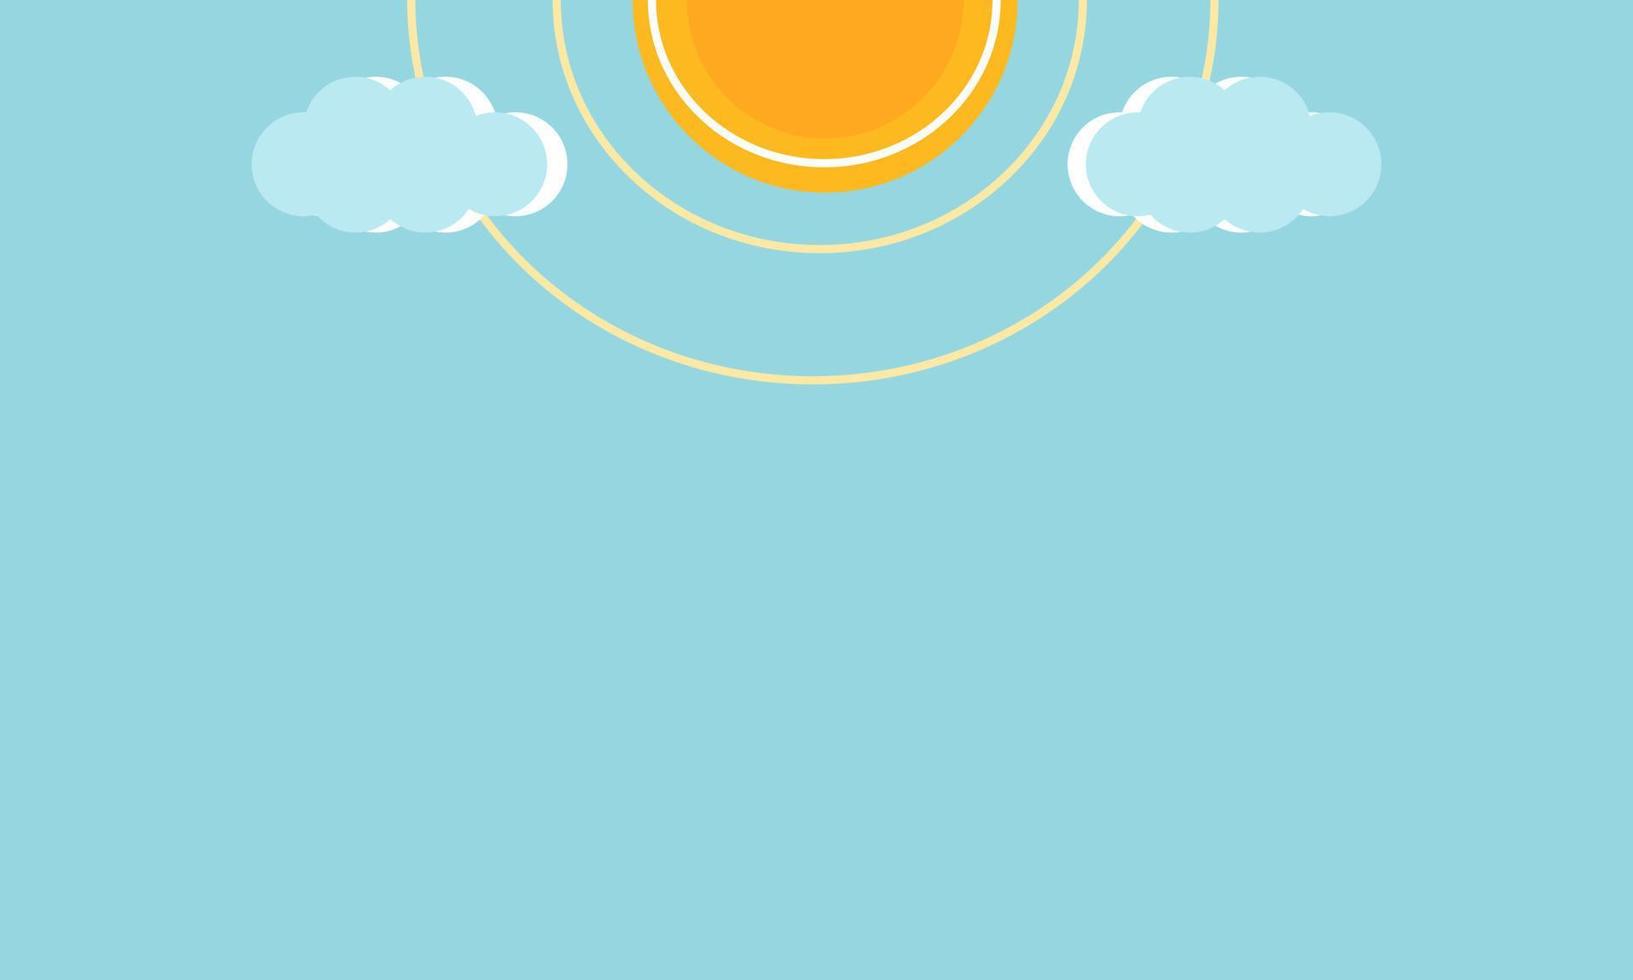 Bright blue sunshine background with sun and clounds, flat vector illustration.